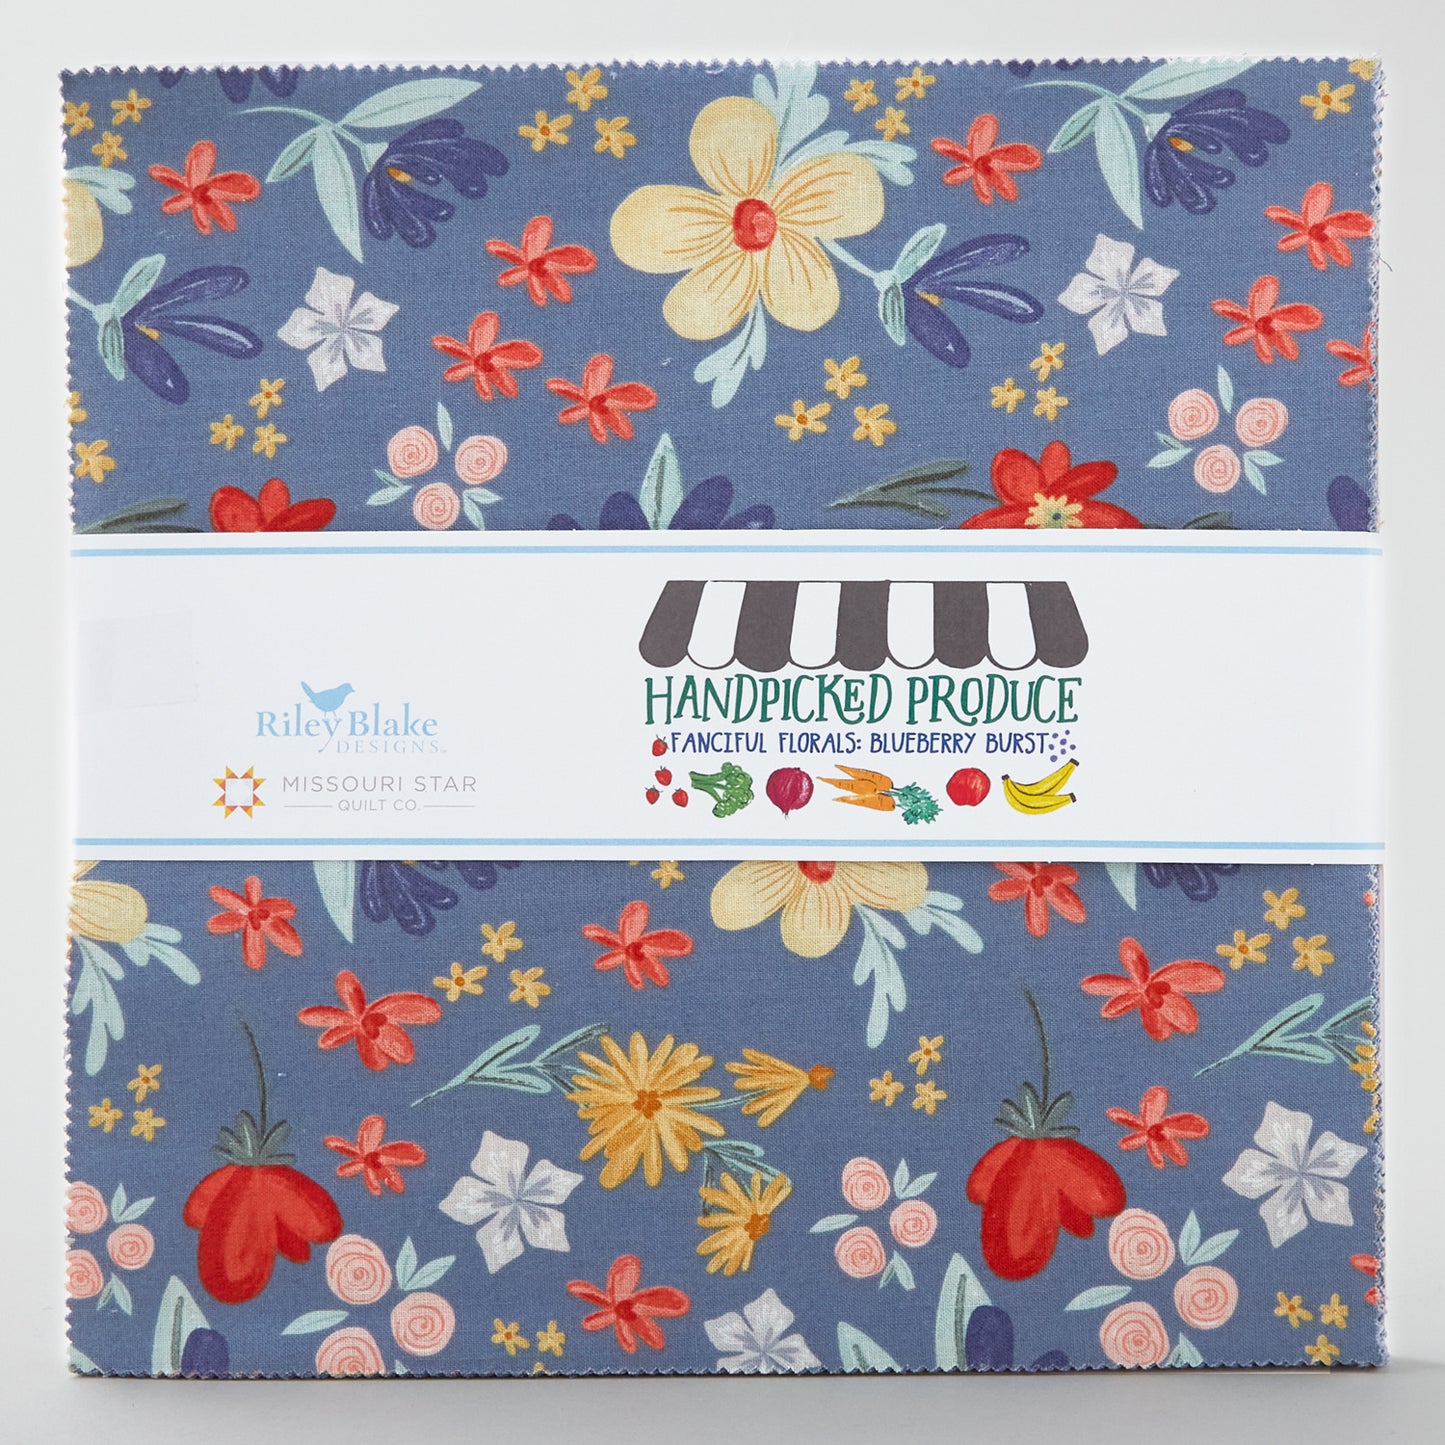 Handpicked Produce - Fanciful Florals Blueberry Burst 10" Stackers 24 pcs. Alternative View #1